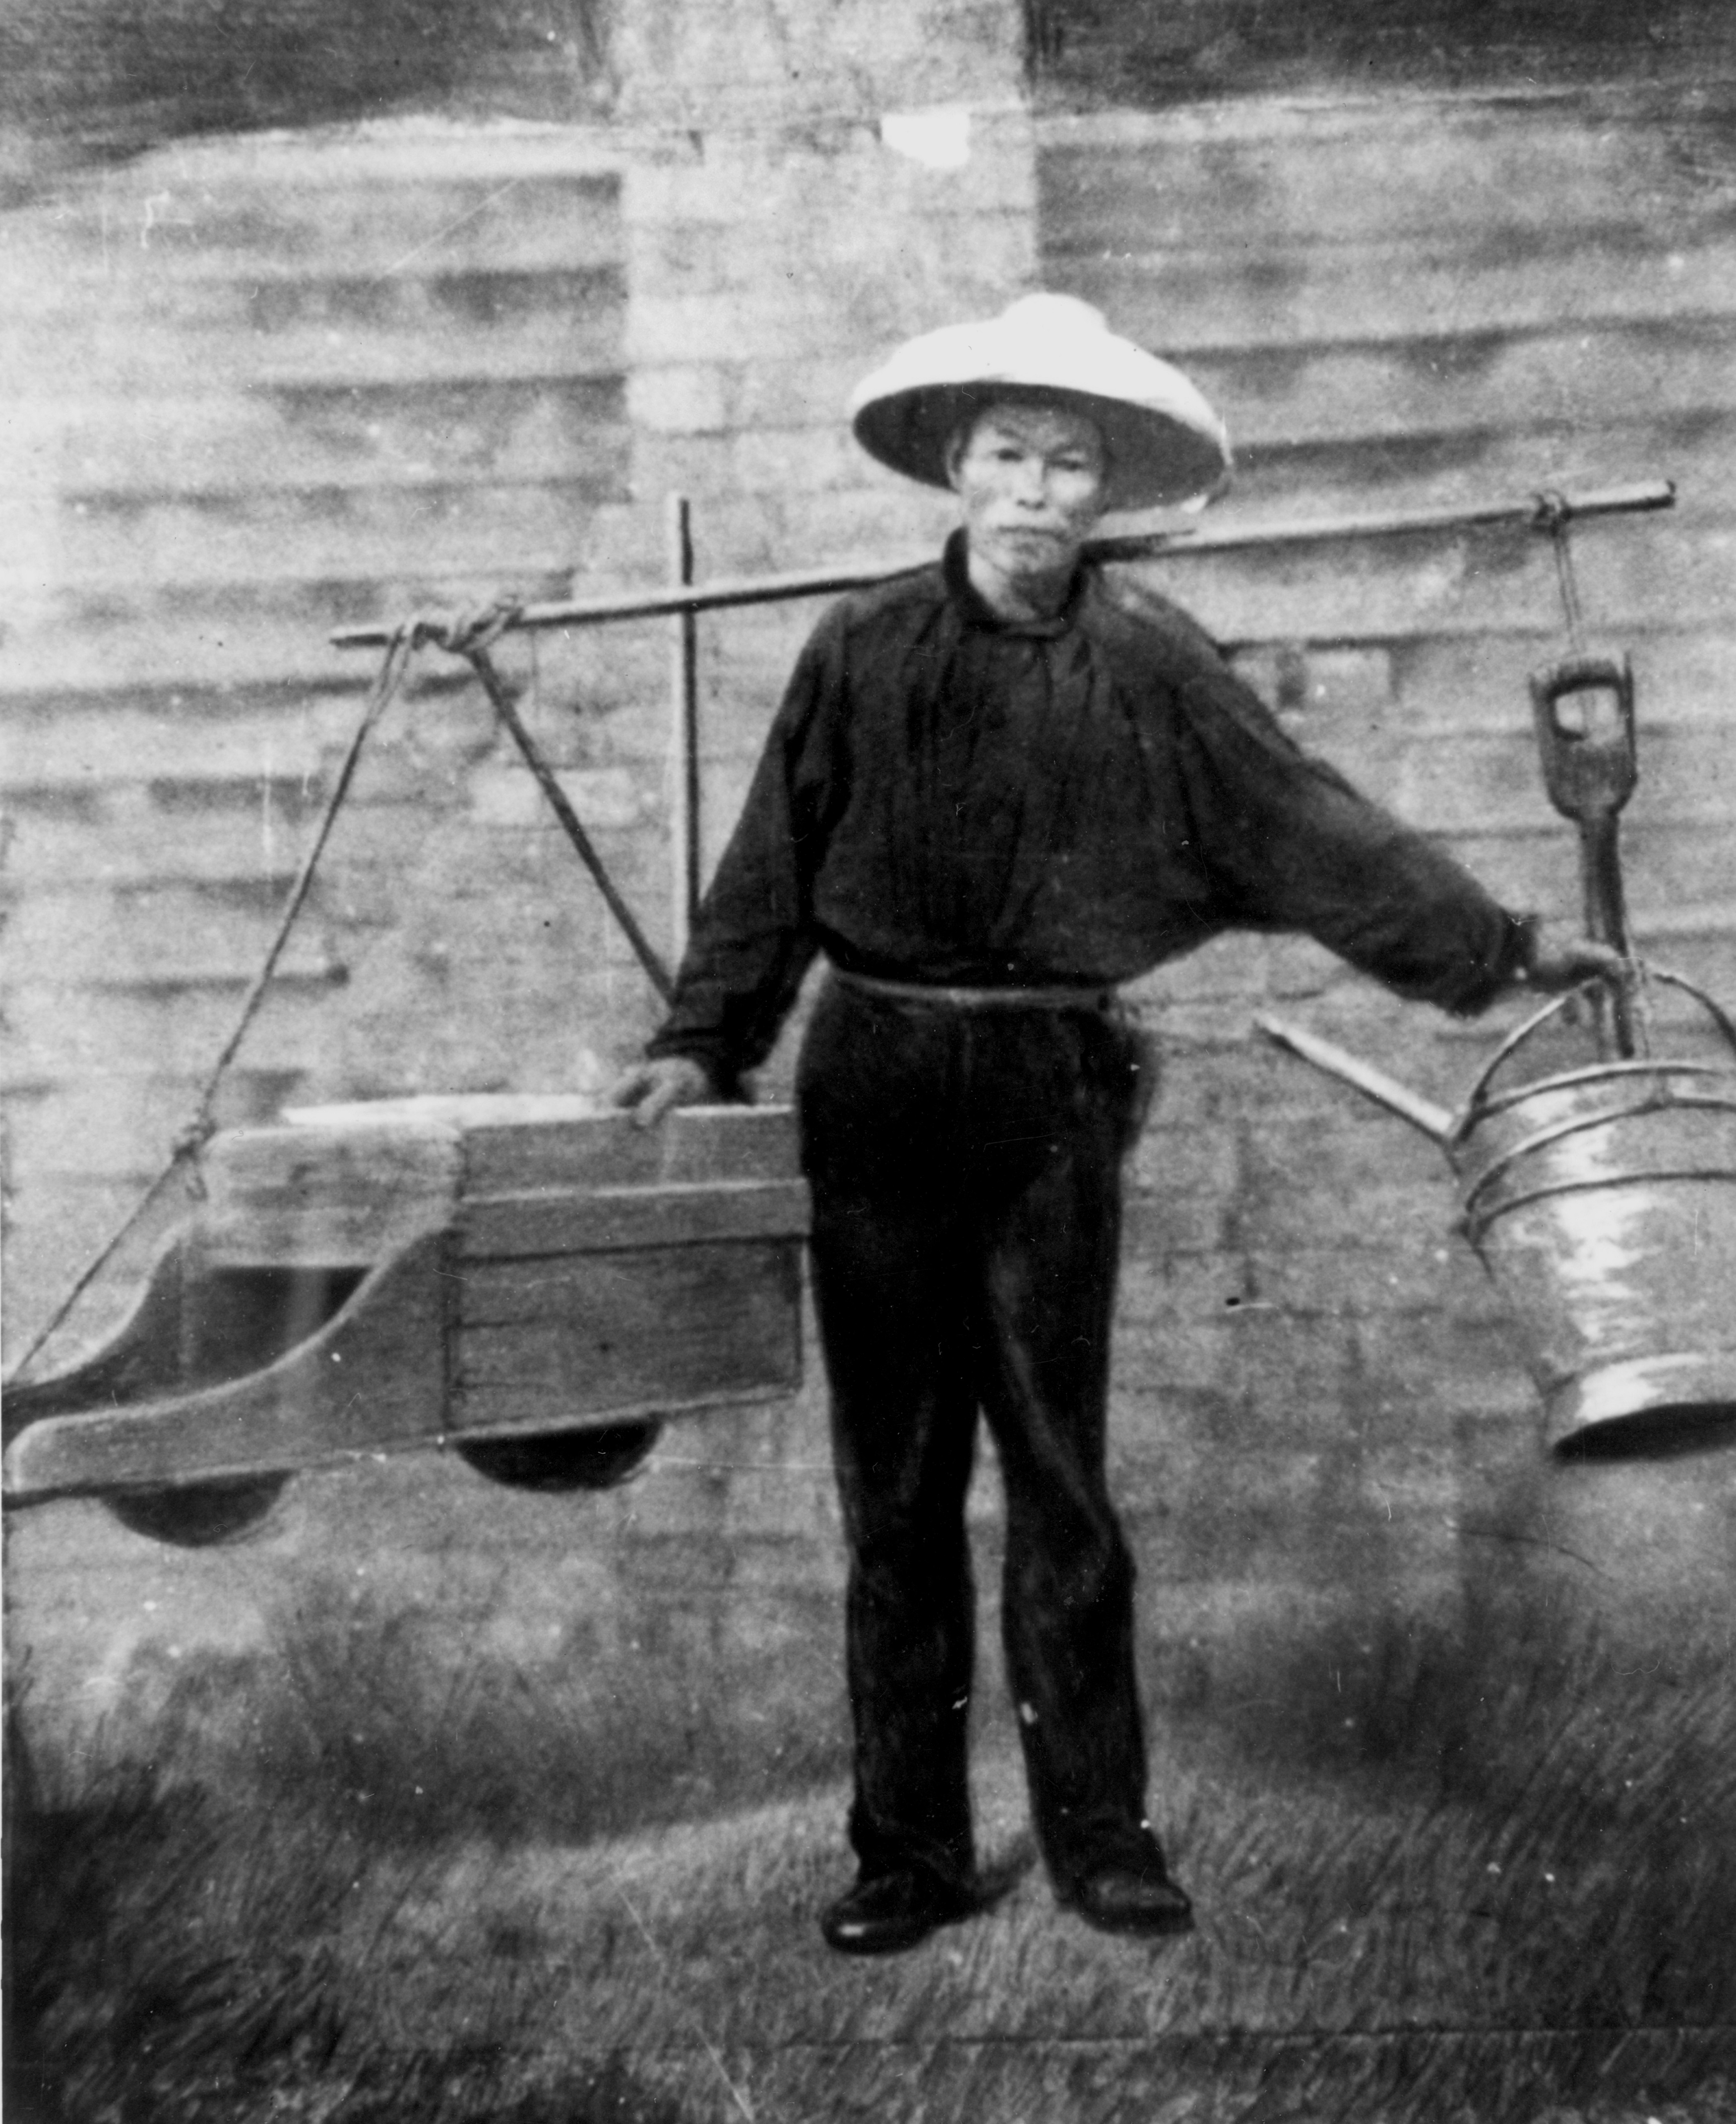 Chinese gold digger, with his mining tools suspended from a yoke across his shoulders, starting for work in the 1860s.